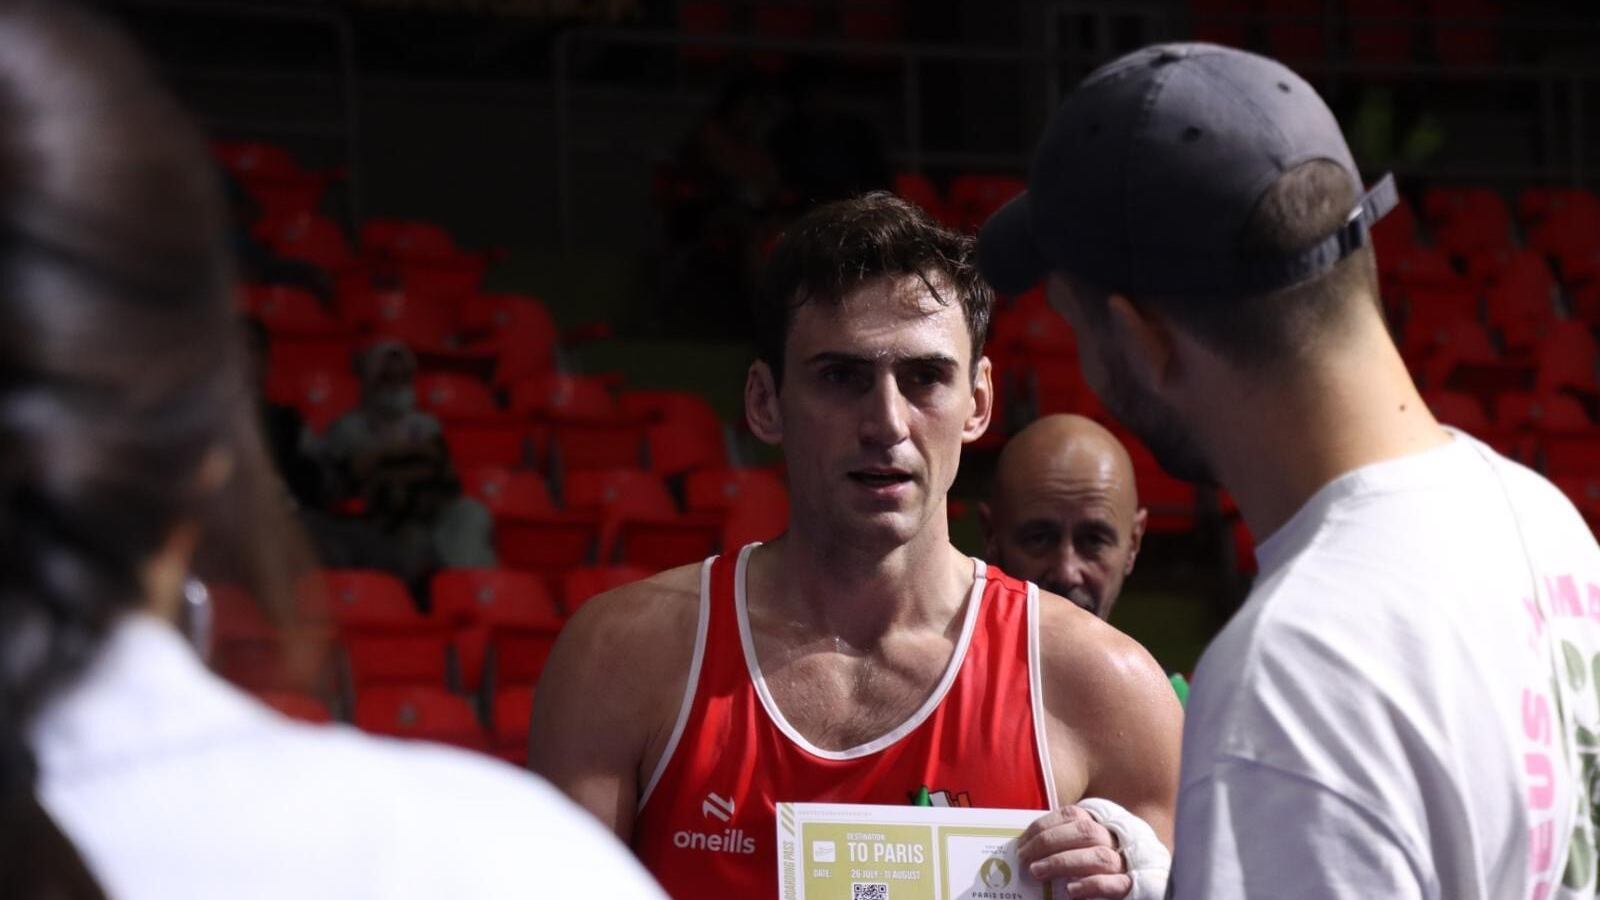 Aidan Walsh collects his Olympic ticket after sealing qualification for Paris in Bangkok on Sunday. Picture by Joe Walsh